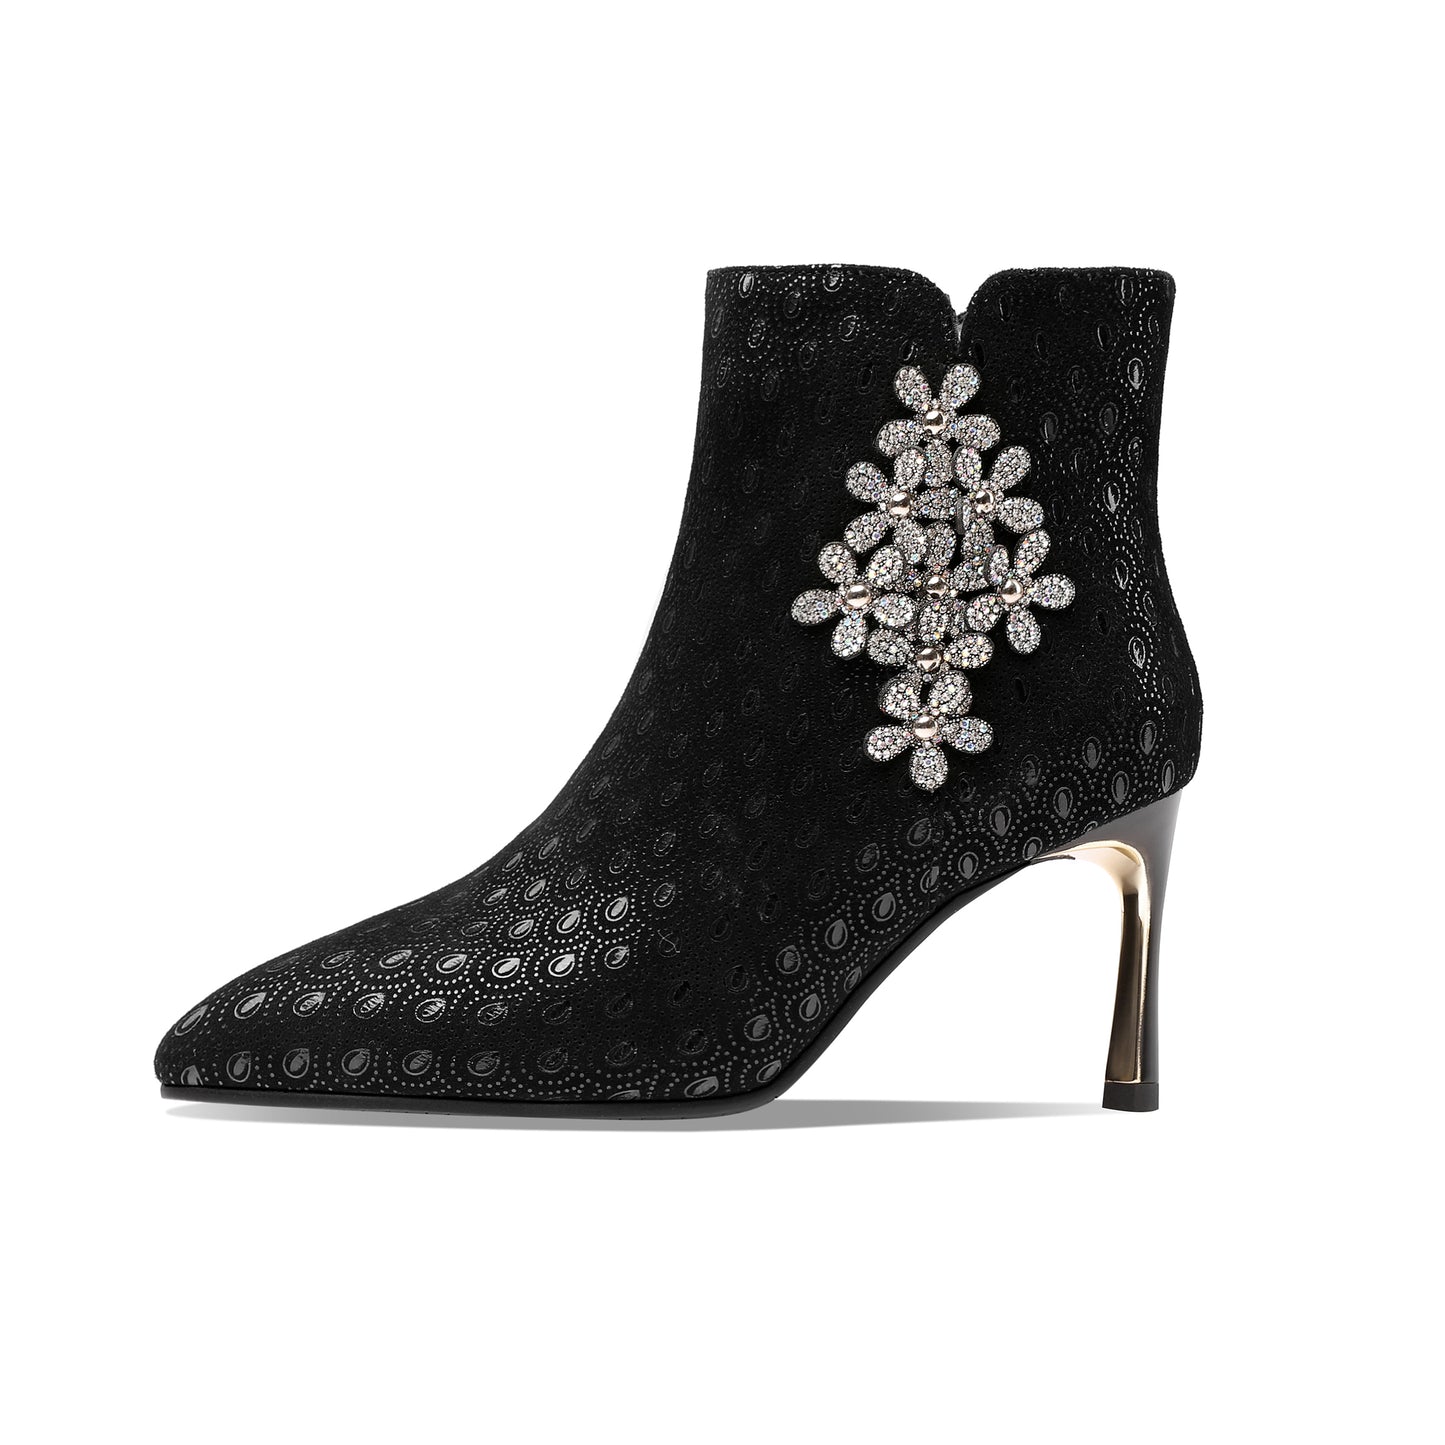 TinaCus Women's Handmade Leather Sexy Metal Heel Side Zip Up Pointed Toe Ankle Boots with Rhinestone Flower